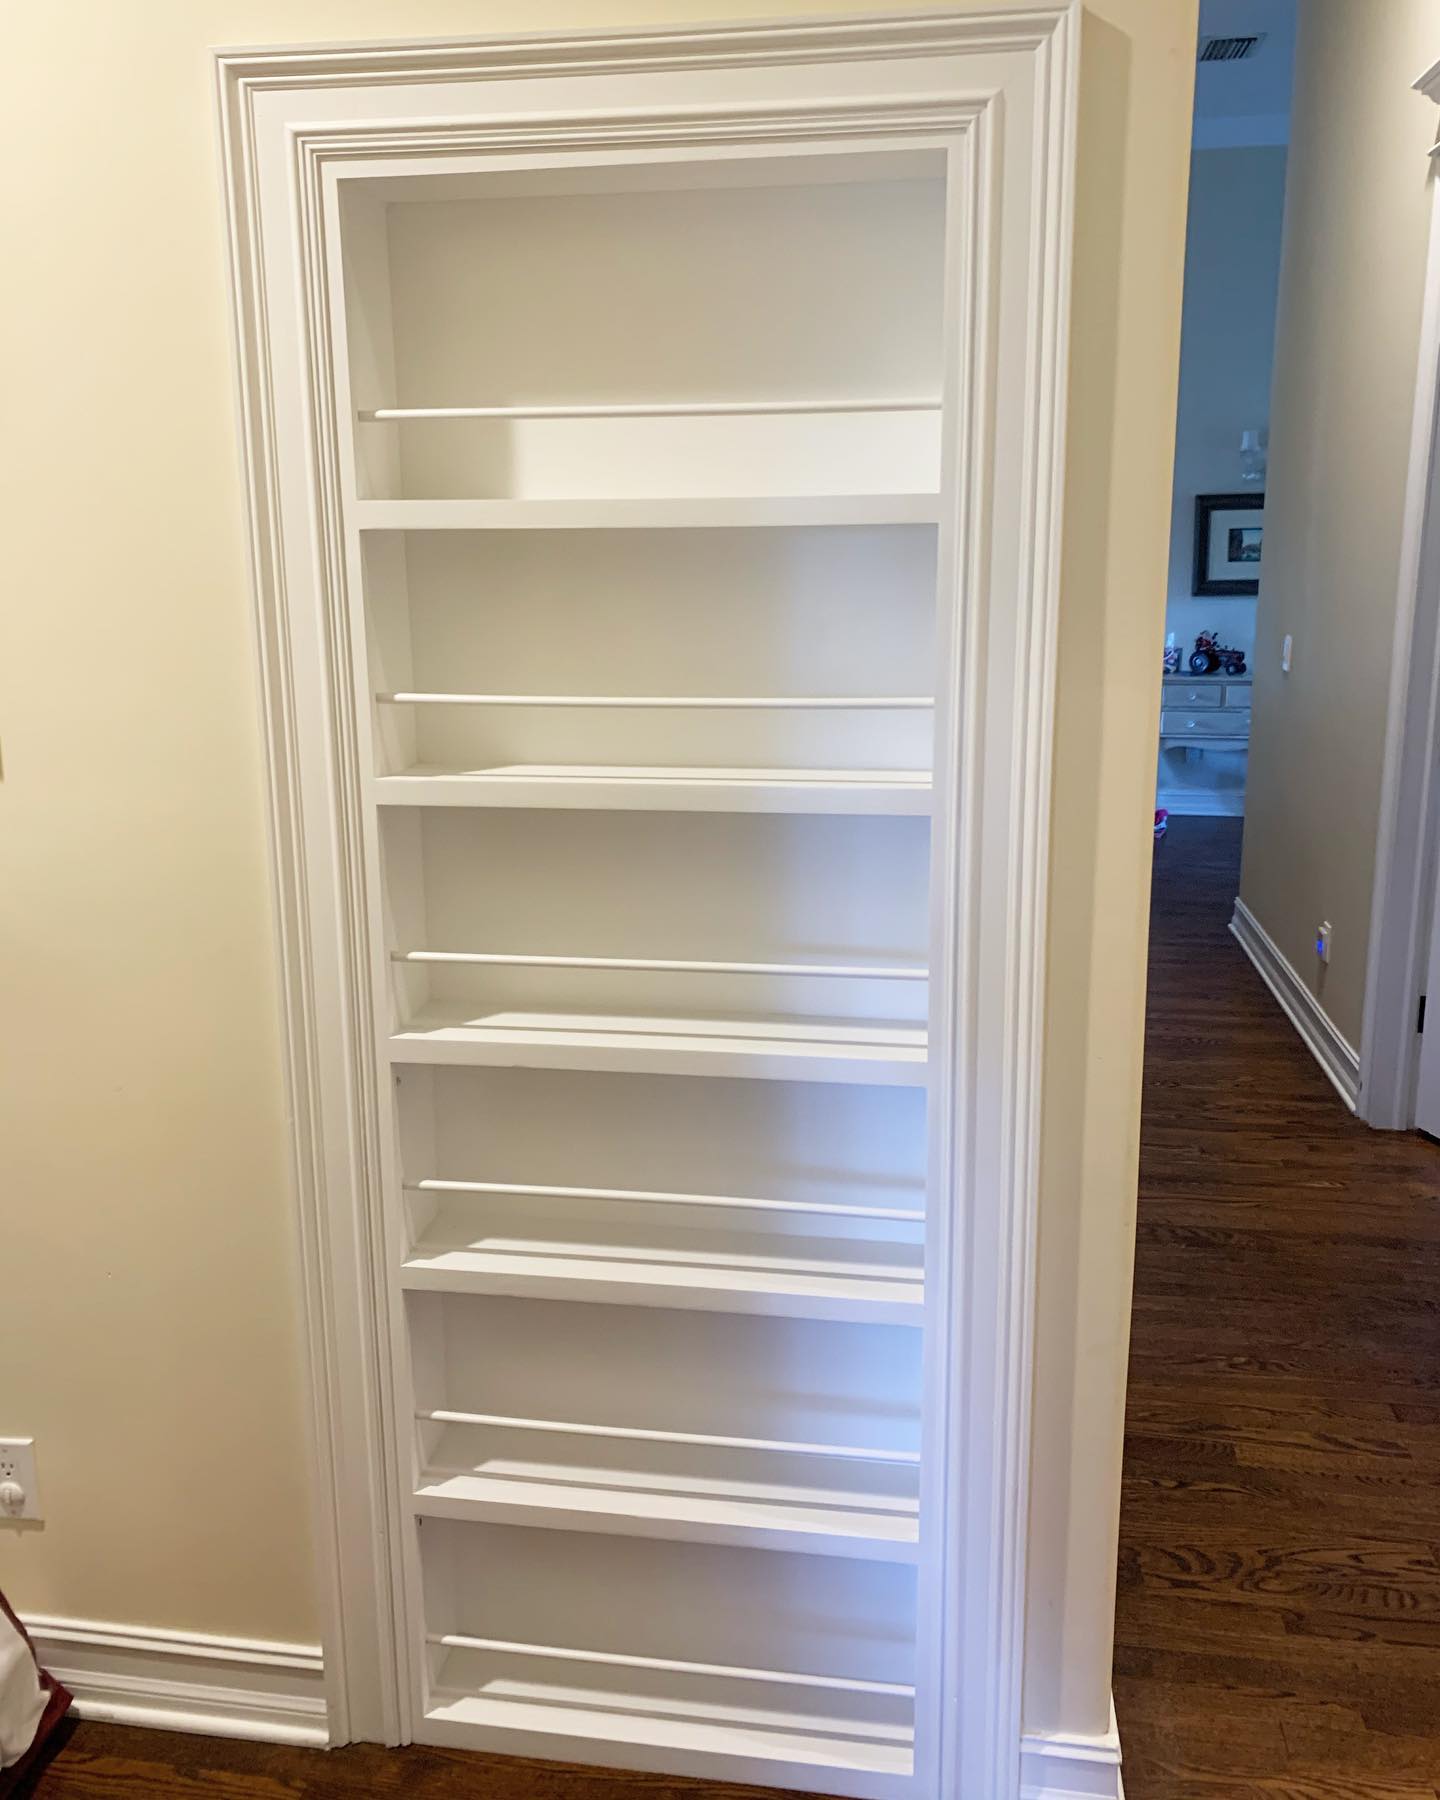 Pantry installed